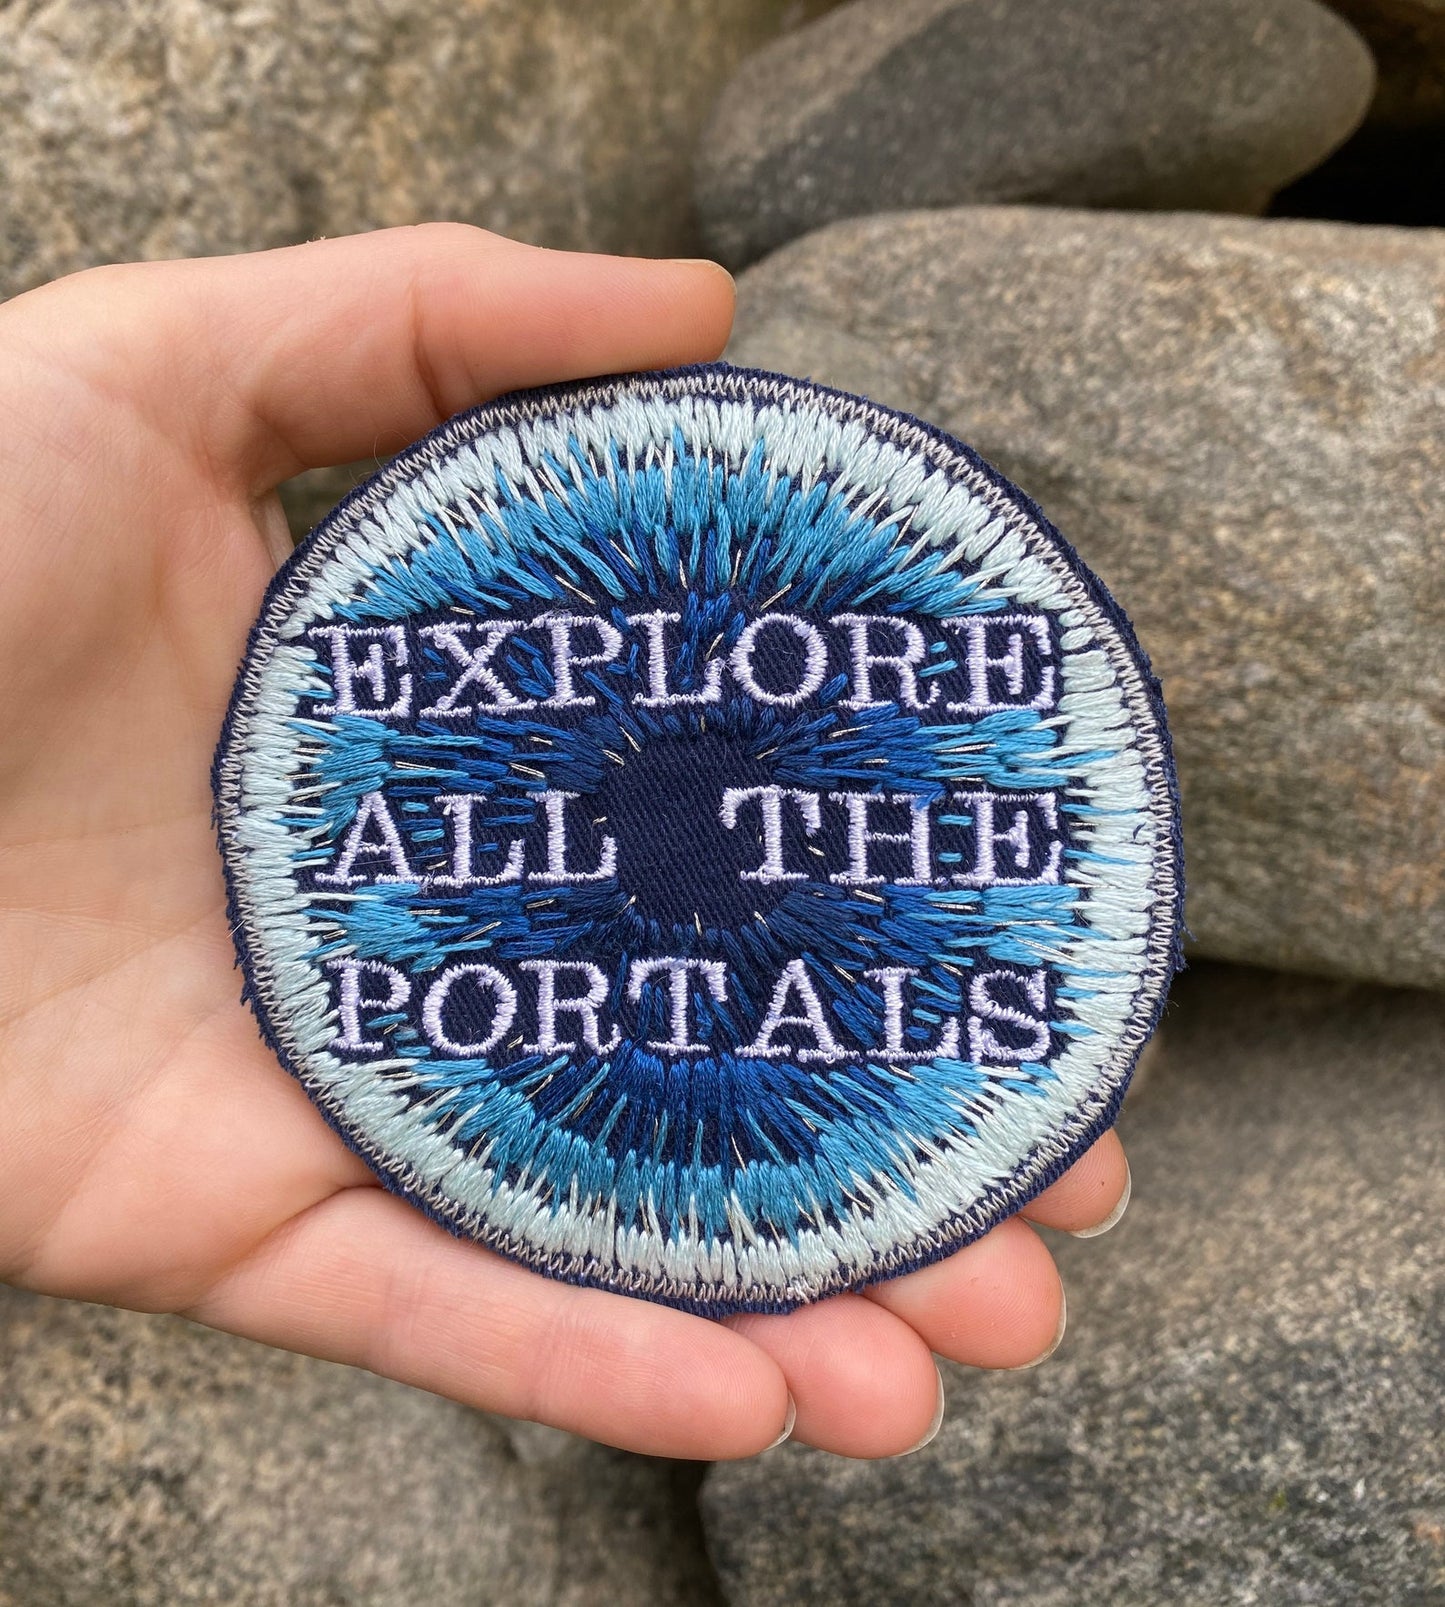 Explore All The Portals. Handmade Embroidered Canvas Patch